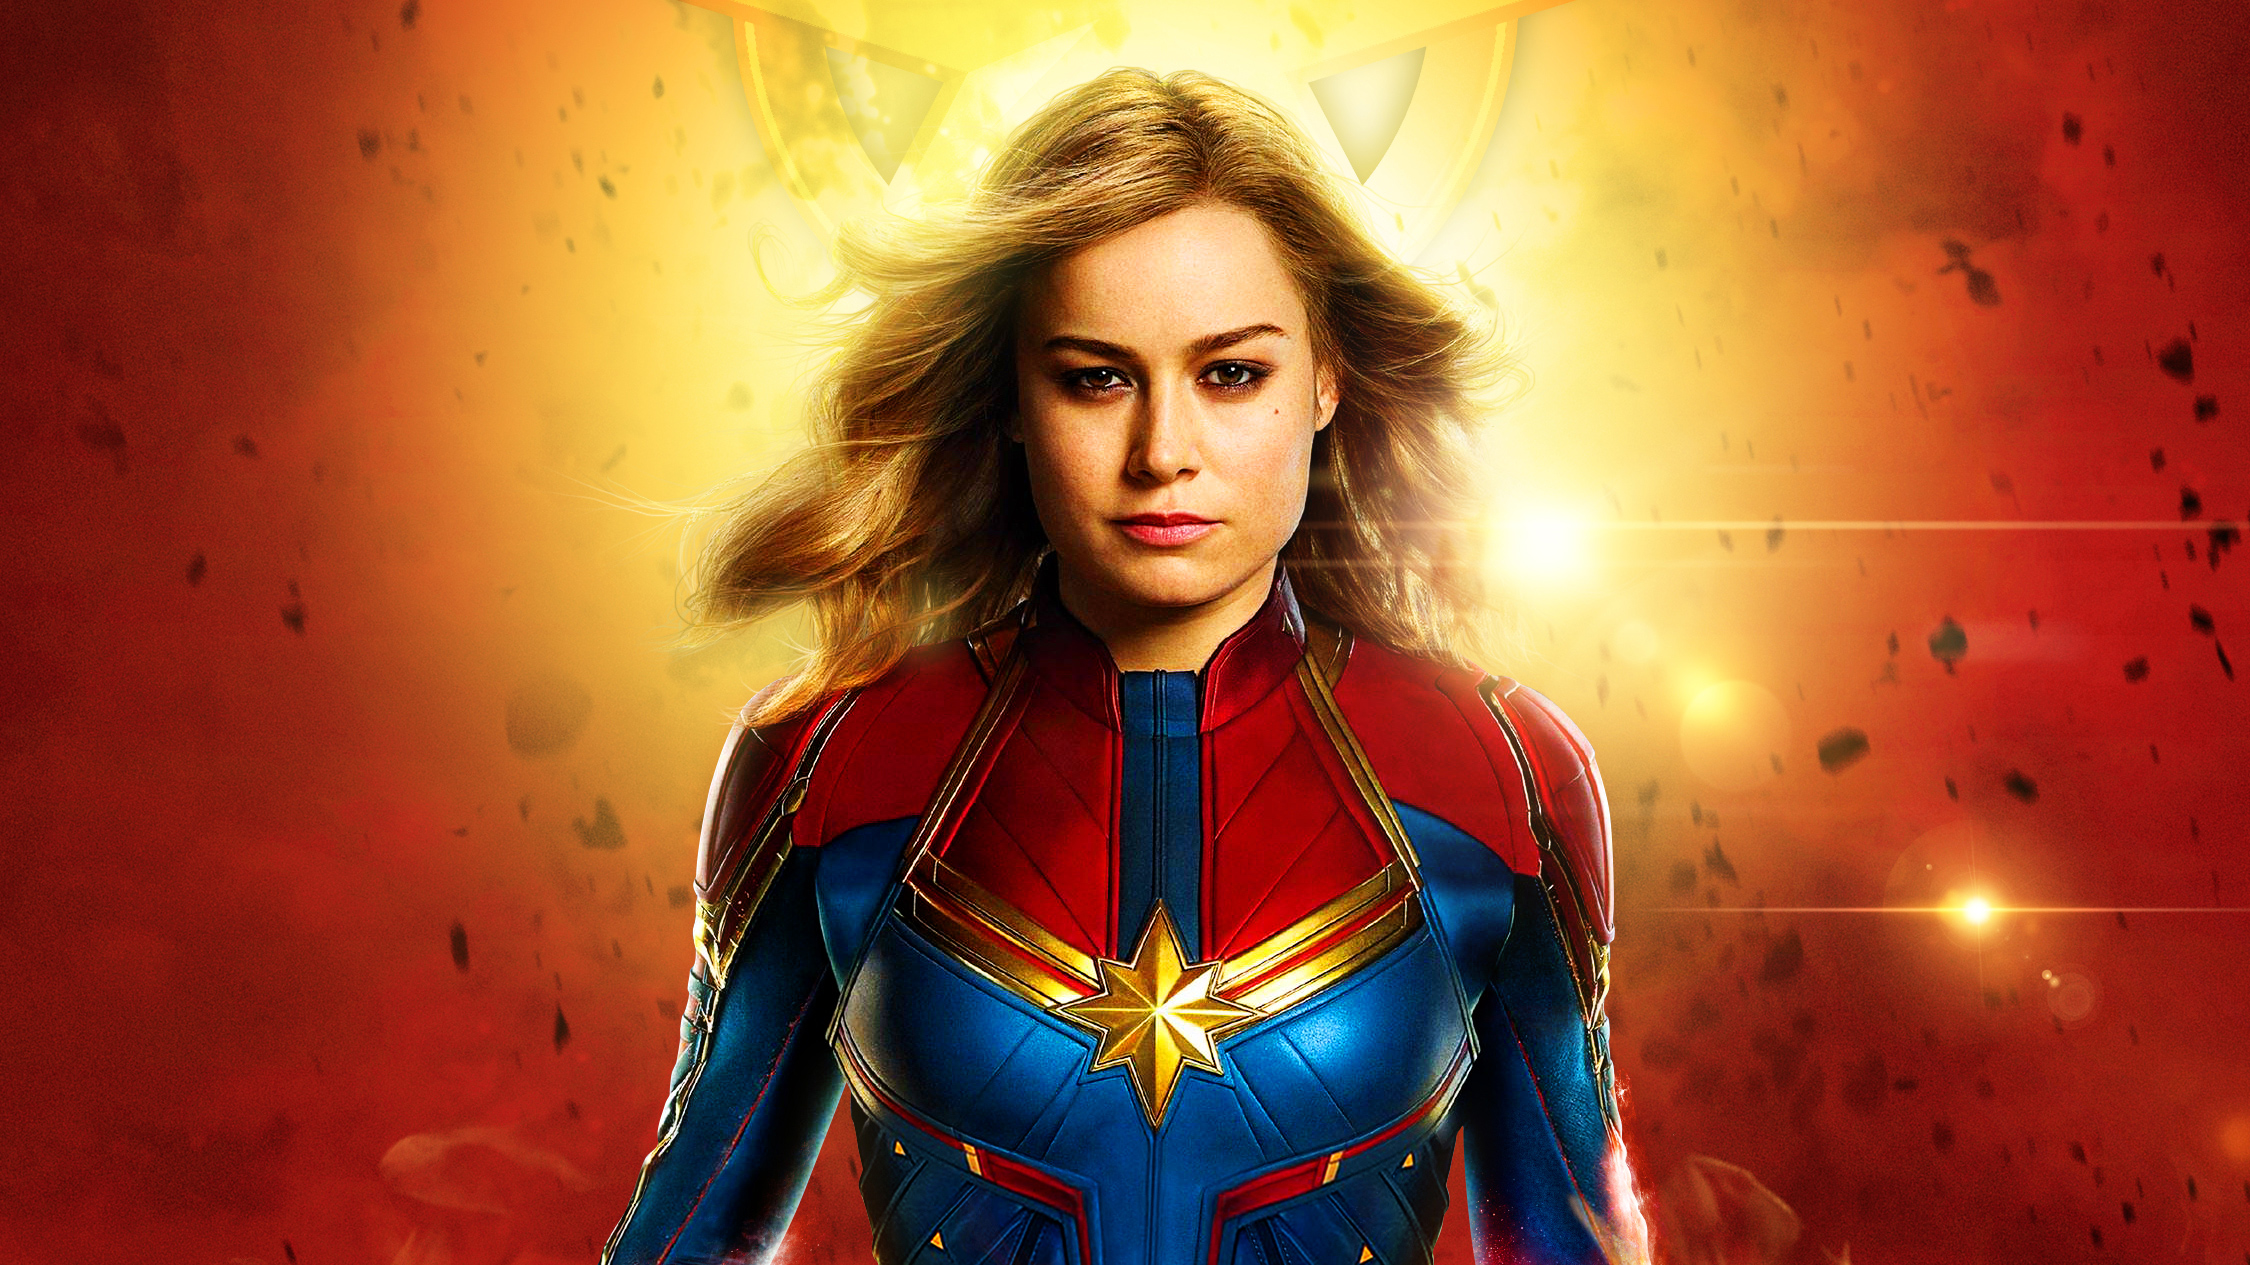 CaptainMarvel Poster, HD Movies, 4k Wallpapers, Image, Backgrounds, Photos ...